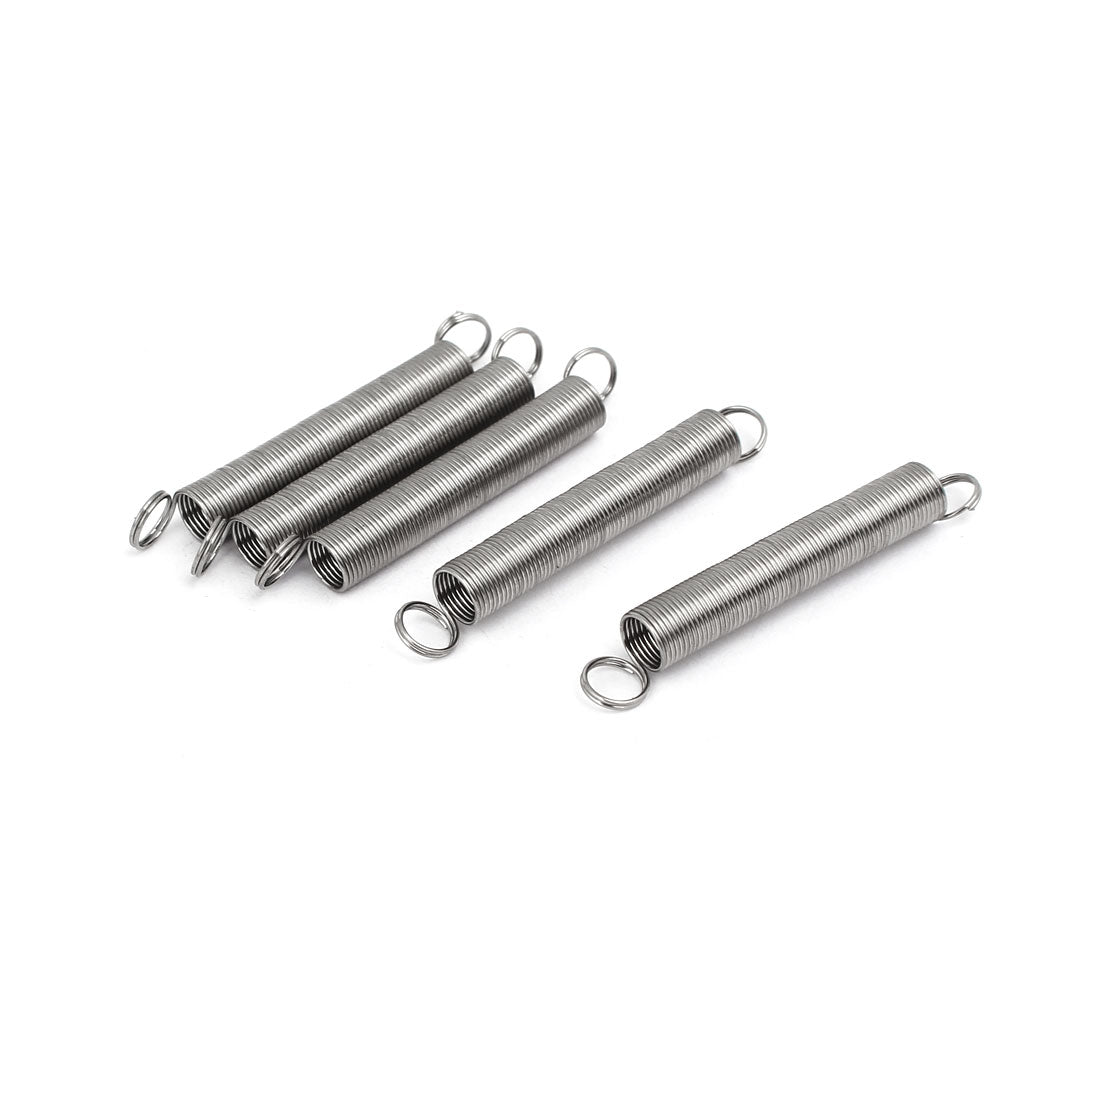 uxcell Uxcell 0.5mmx6mmx45mm 304 Stainless Steel Tension Springs Silver Tone 5pcs